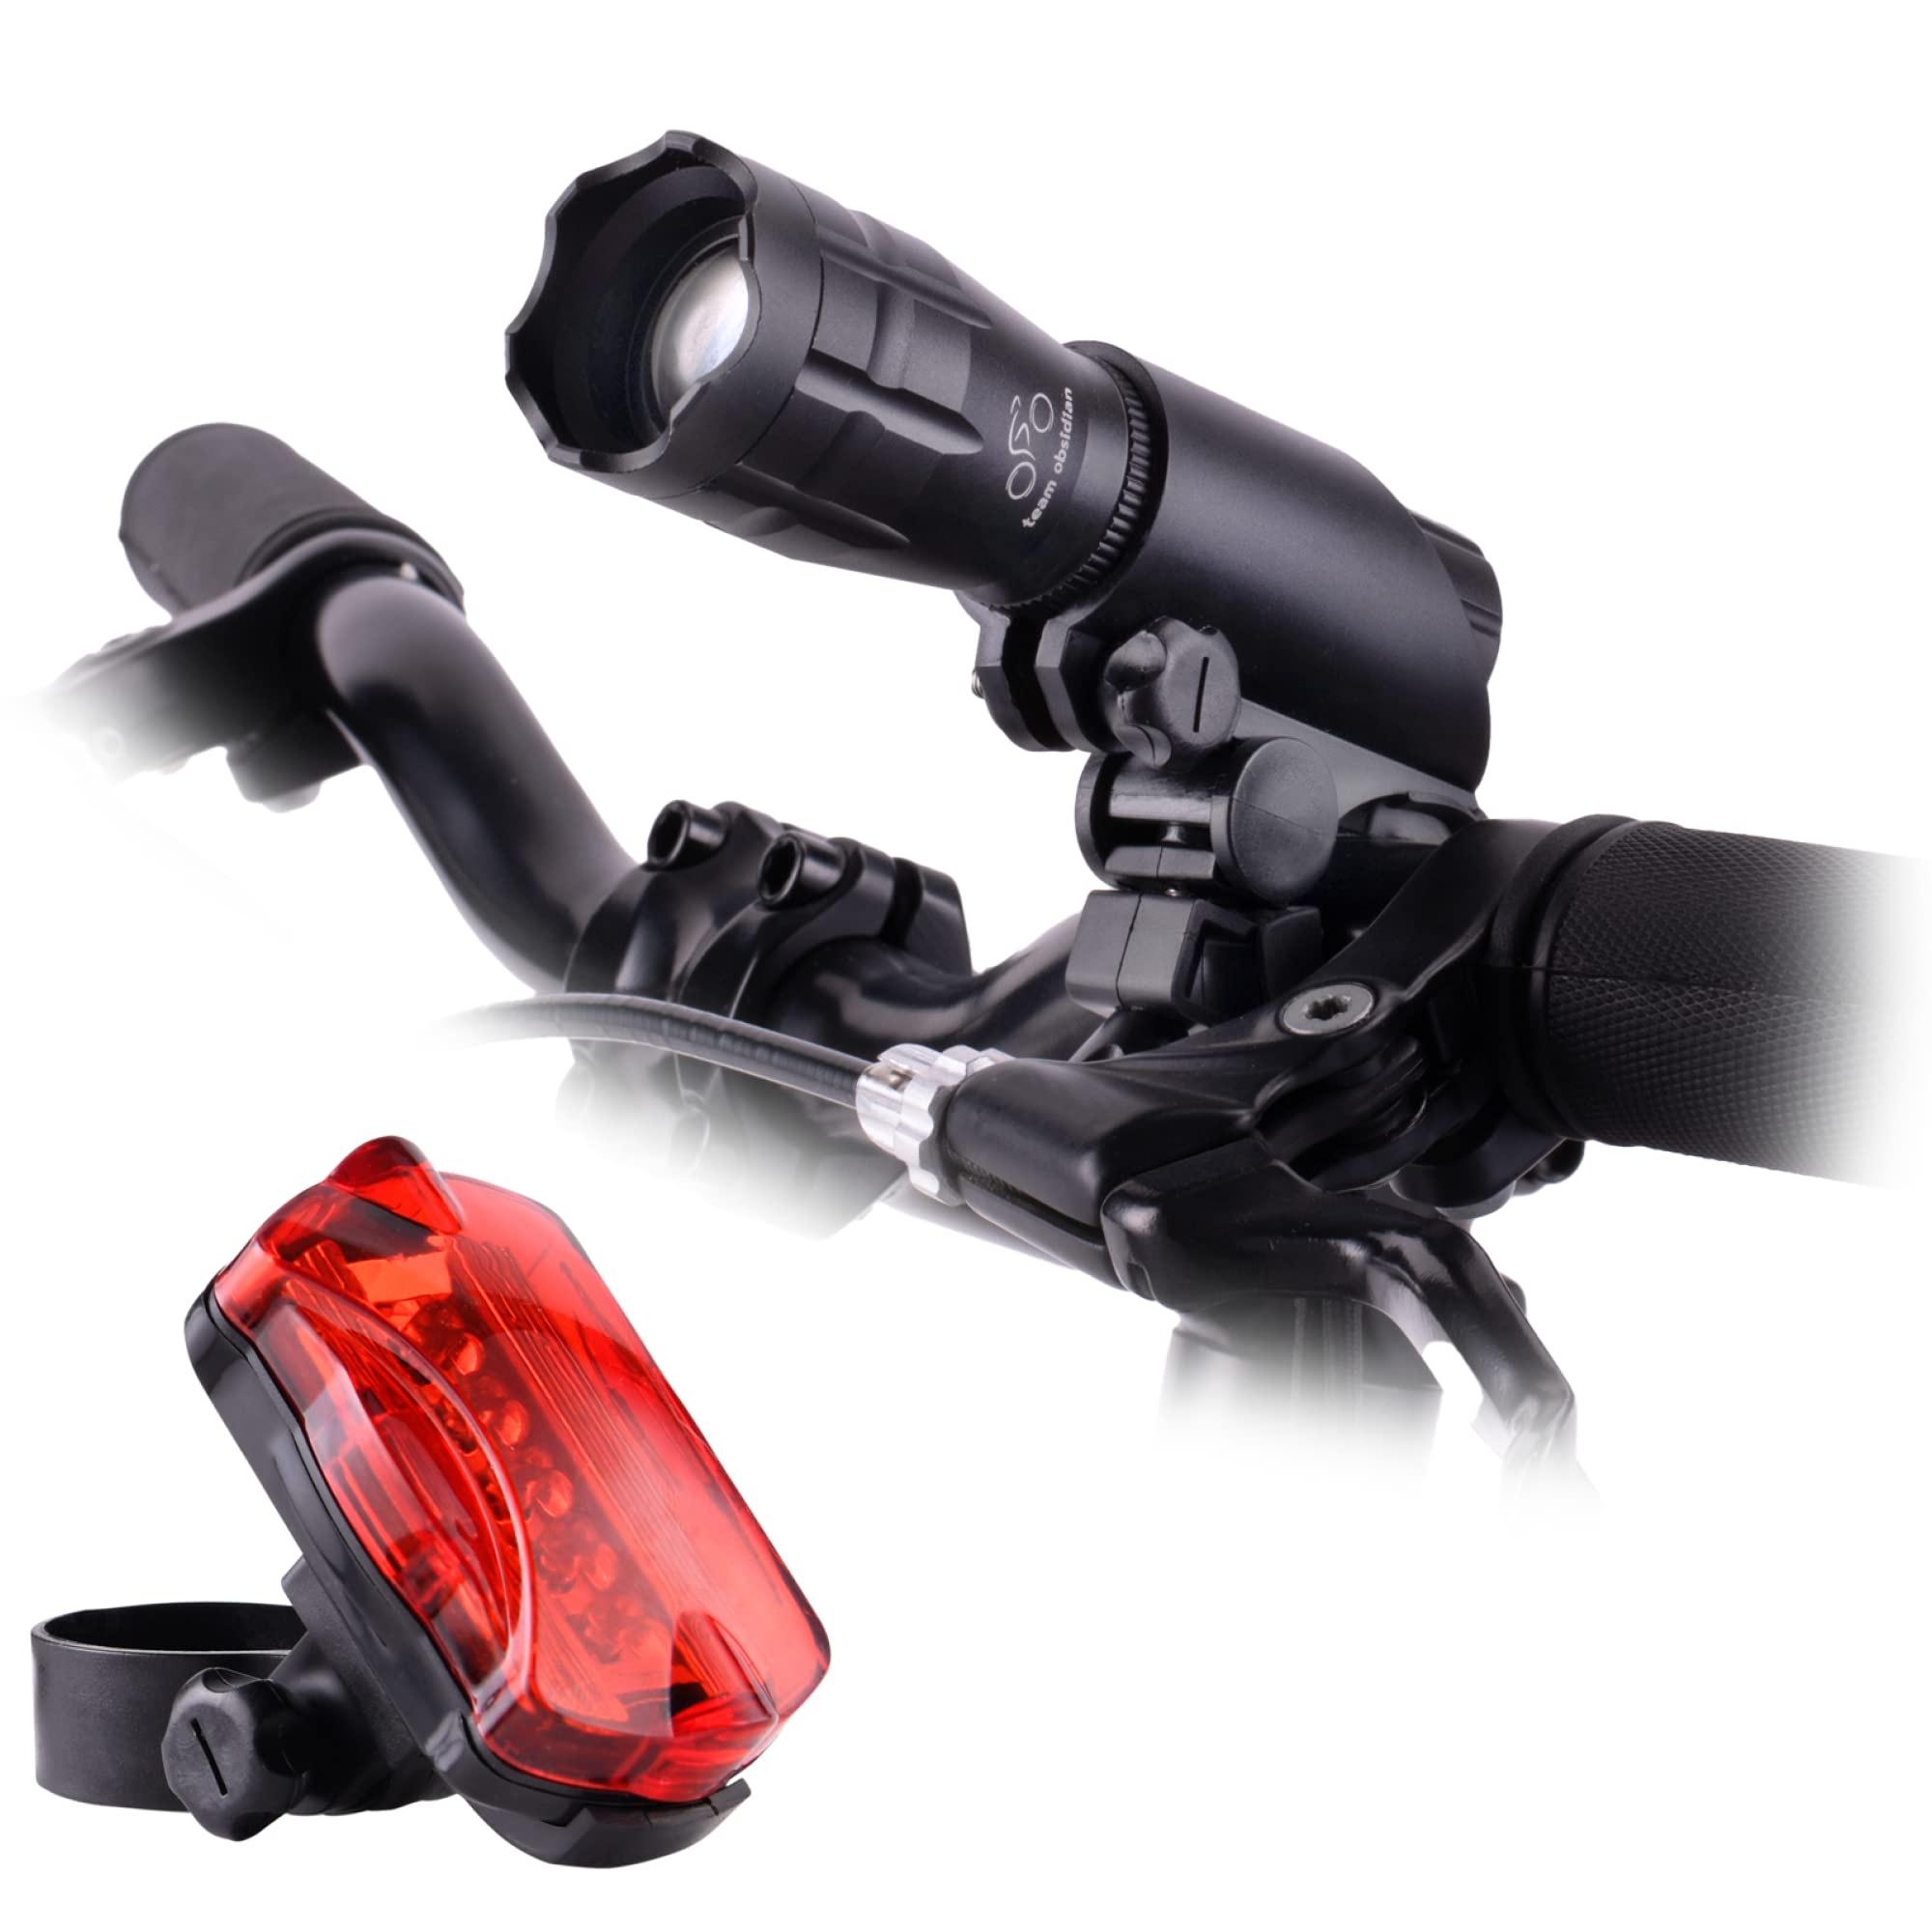 Team Obsidian: Bike Lights Set - BATTERY POWERED - Super Bright front and  back LED Lights for Your Bicycle - Easy to Mount Bike Headlight and Tail  Light for Night Riding 